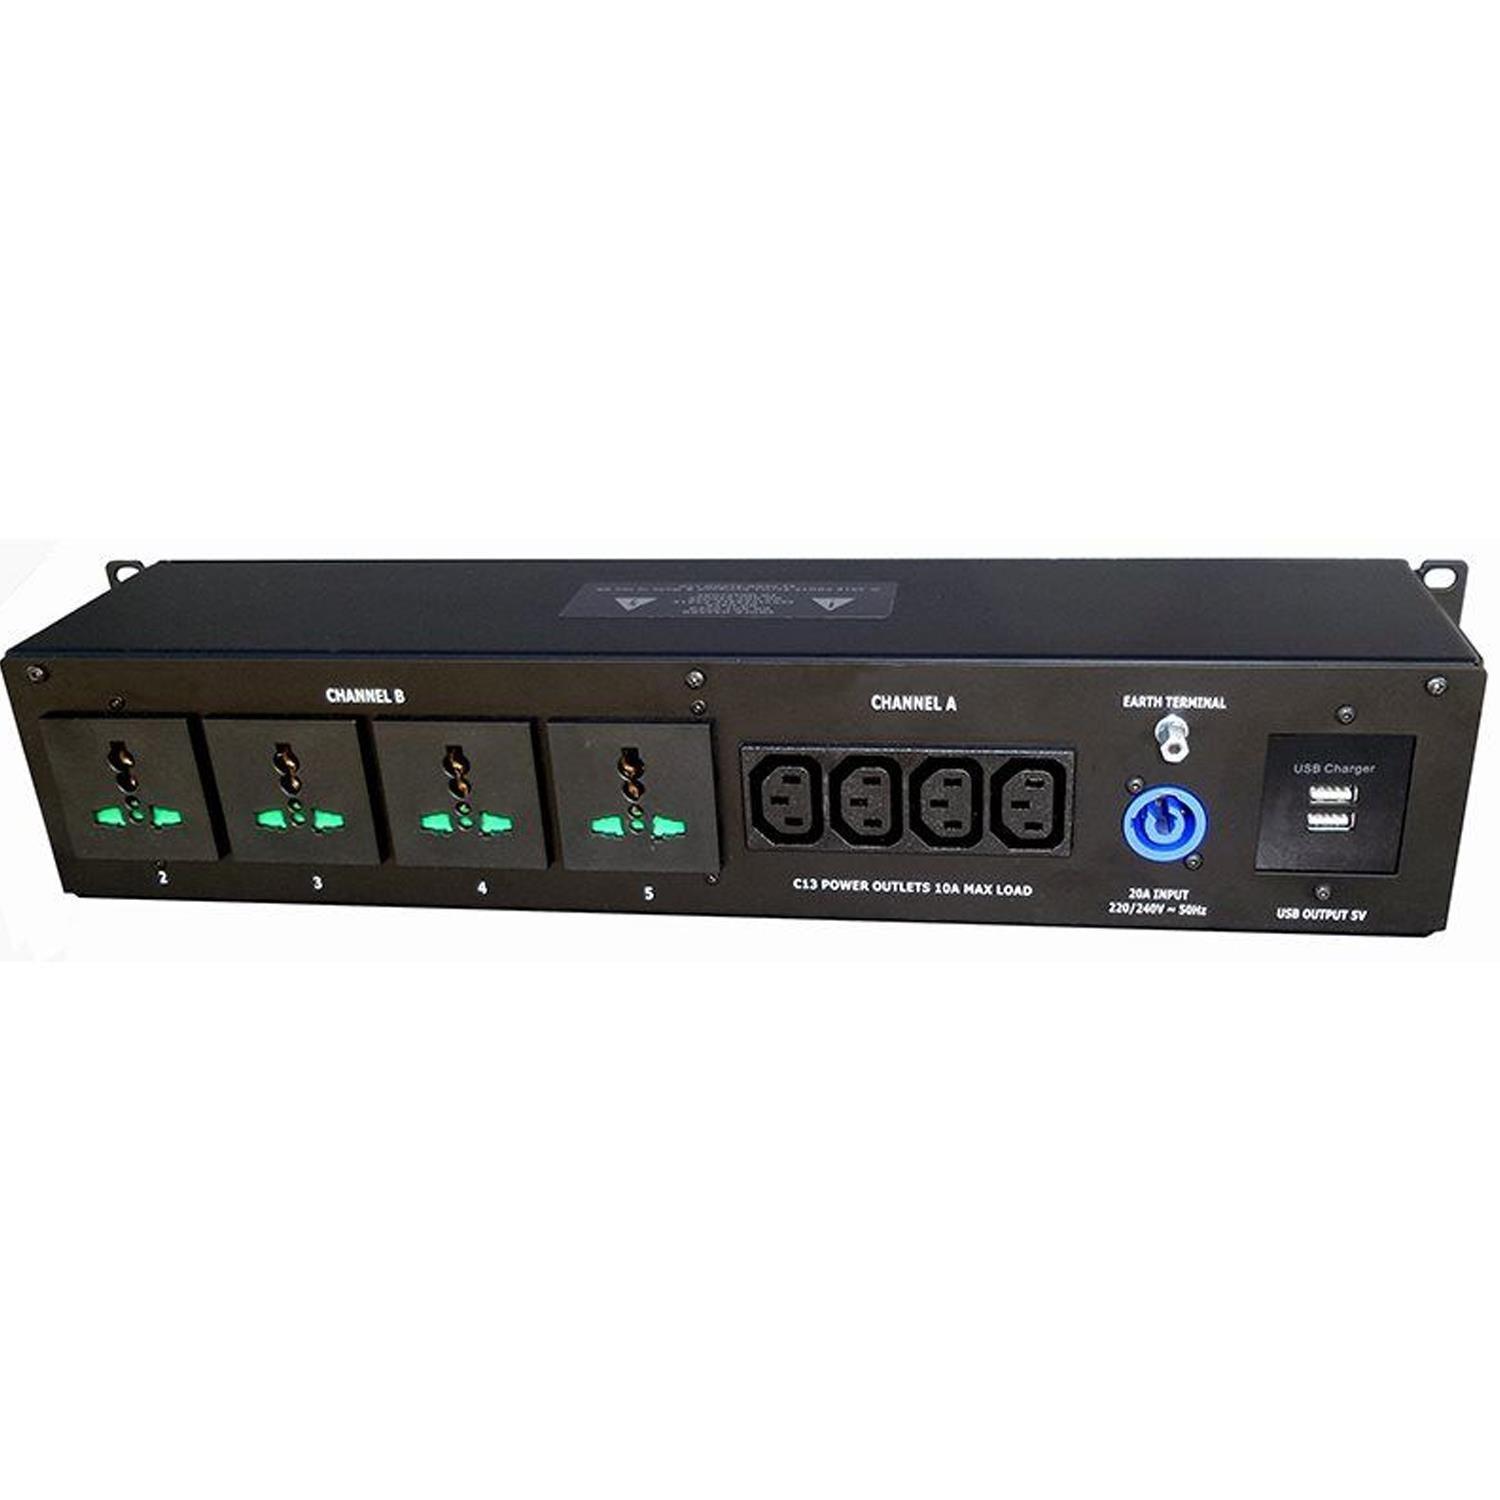 Penn Elcom PDU16-AV 2U 20 Amp Rack Mount PDU with Power Monitoring and Overload Protection - DY Pro Audio